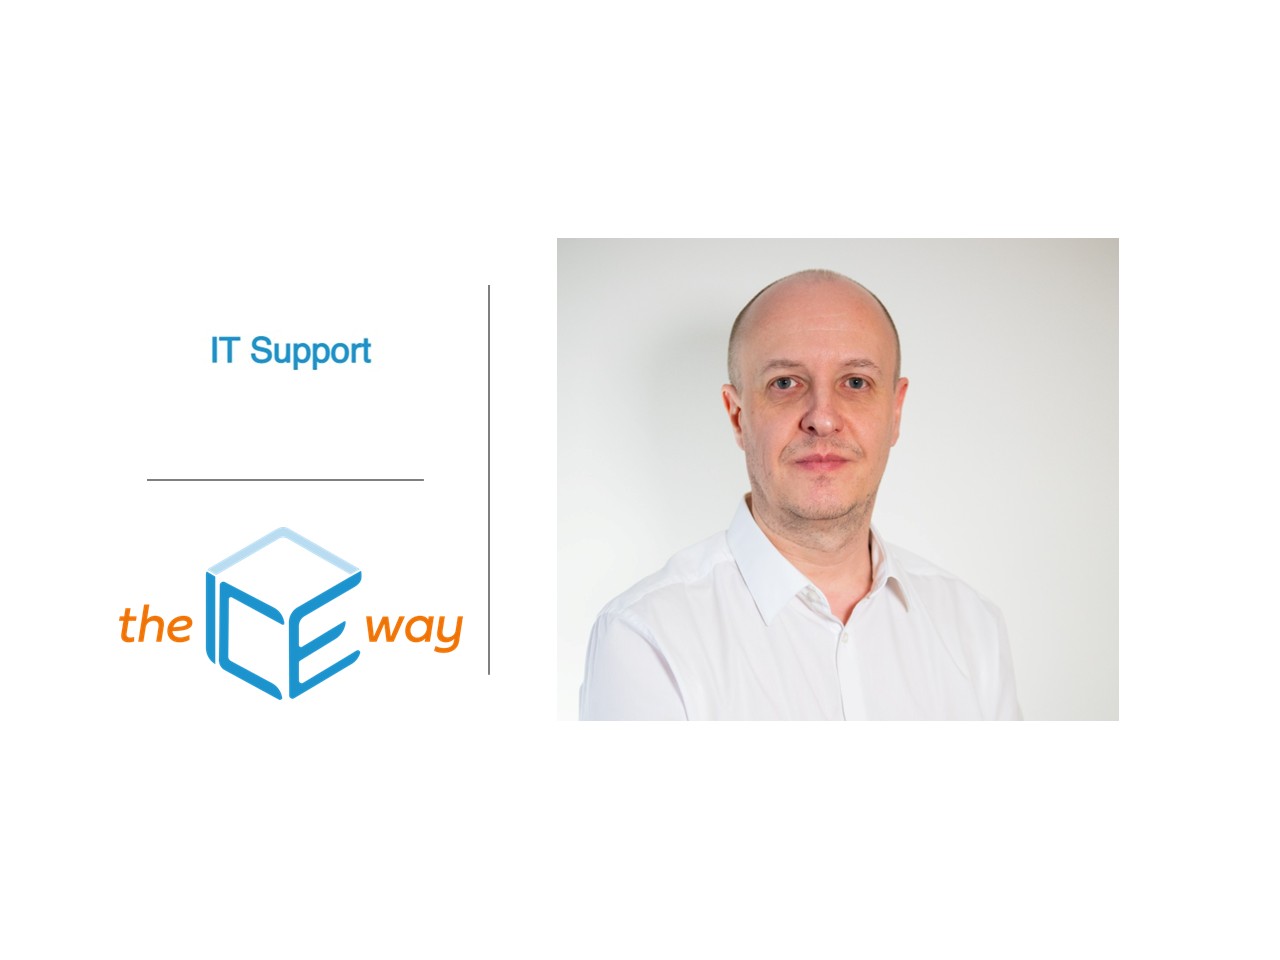 IT Support from theICEway: A Q&A with Kevin Sturdy